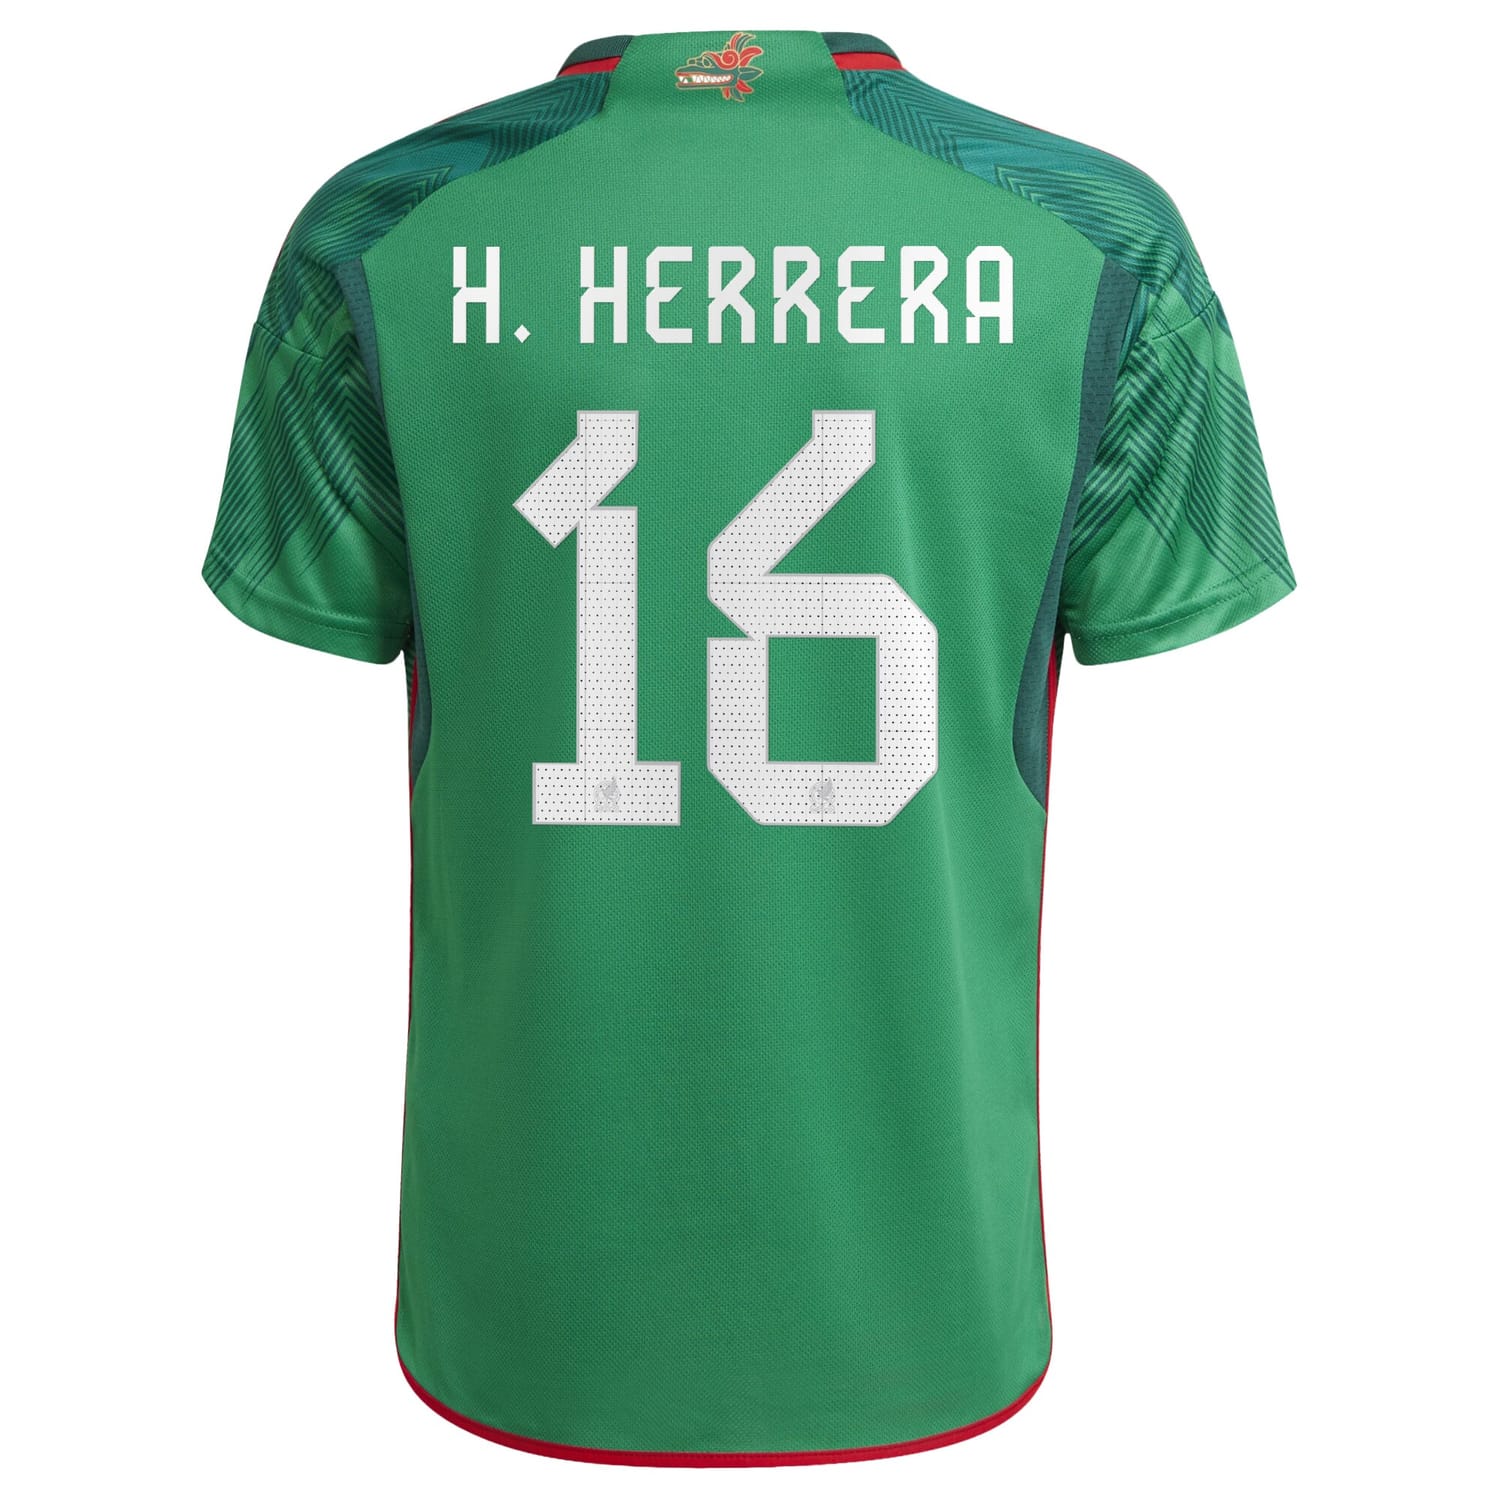 Mexico National Team Home Jersey Shirt Green 2022-23 player Héctor Herrera printing for Men